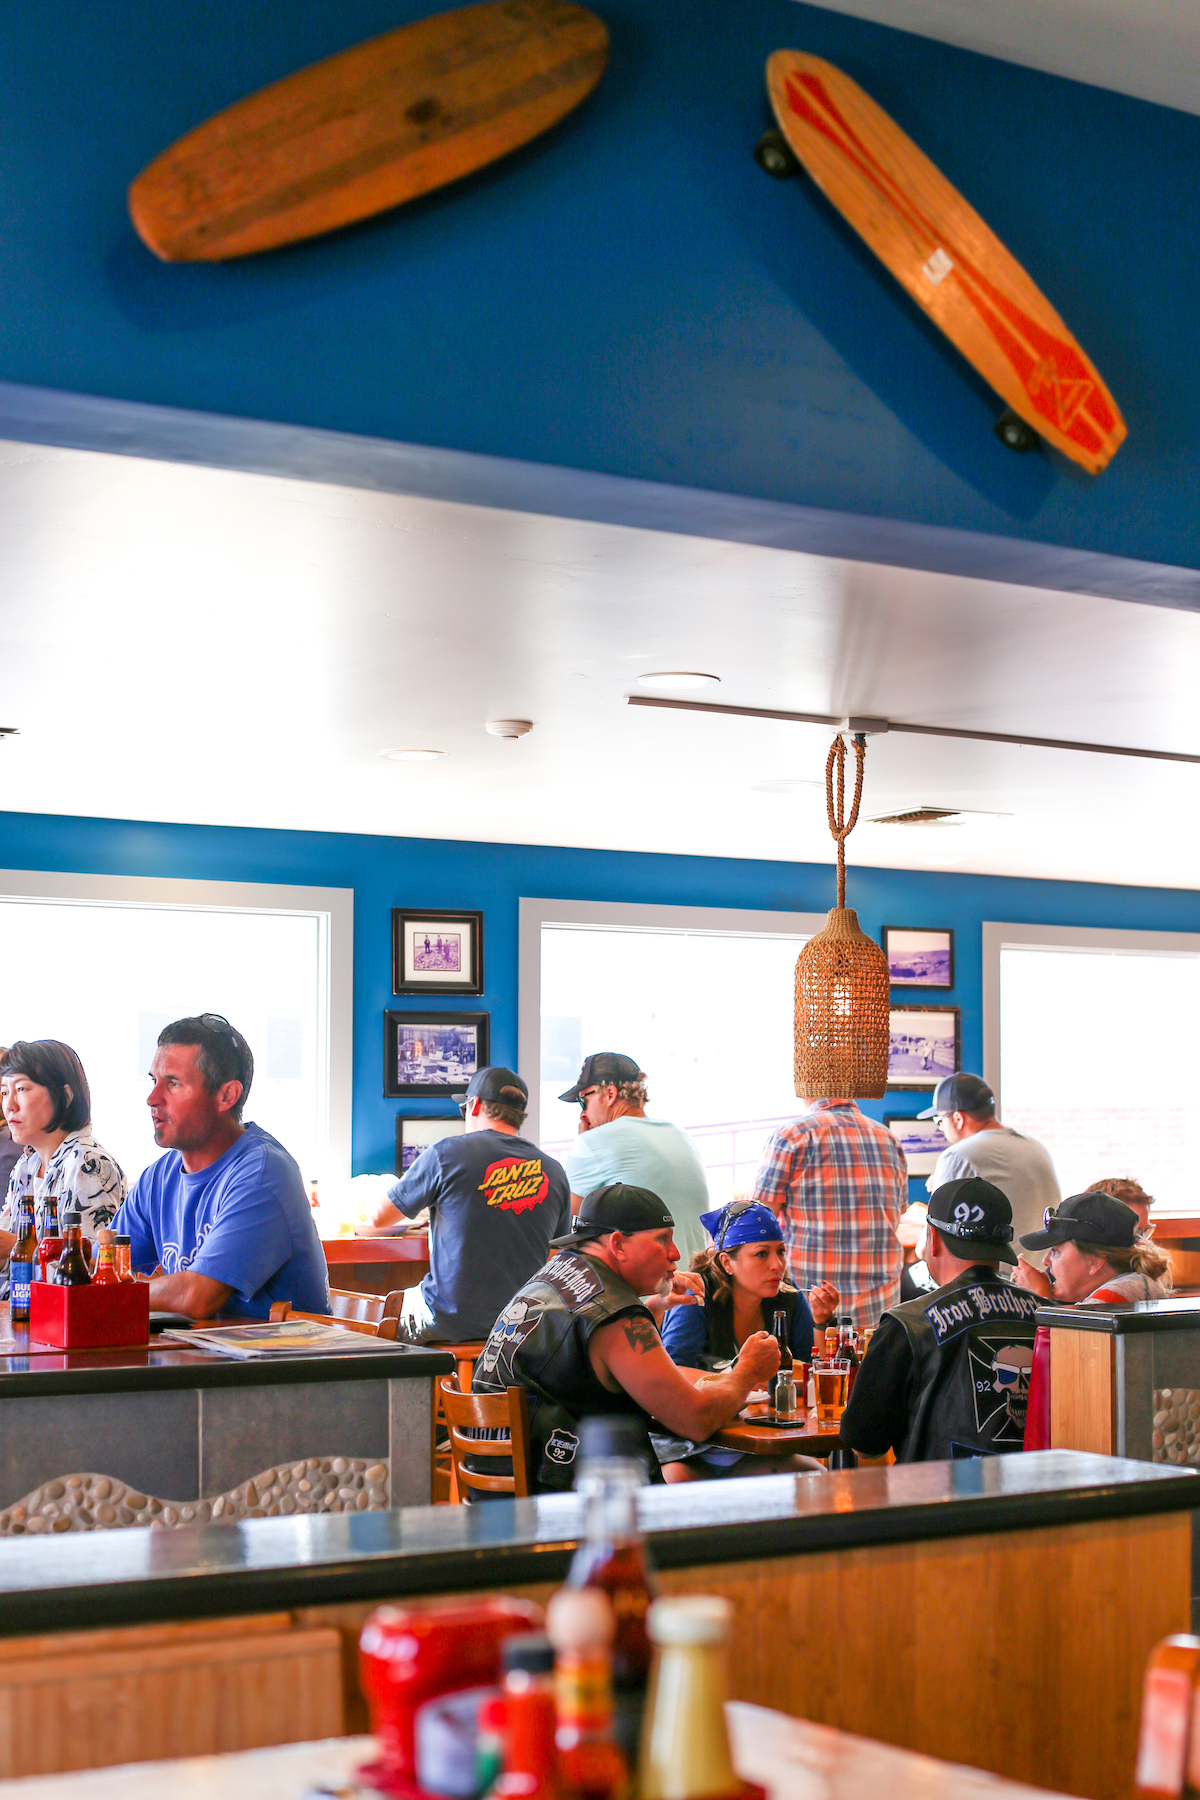 Interior of Duckie's Chowder House in Cayucos with diners eating at tables and on barstools